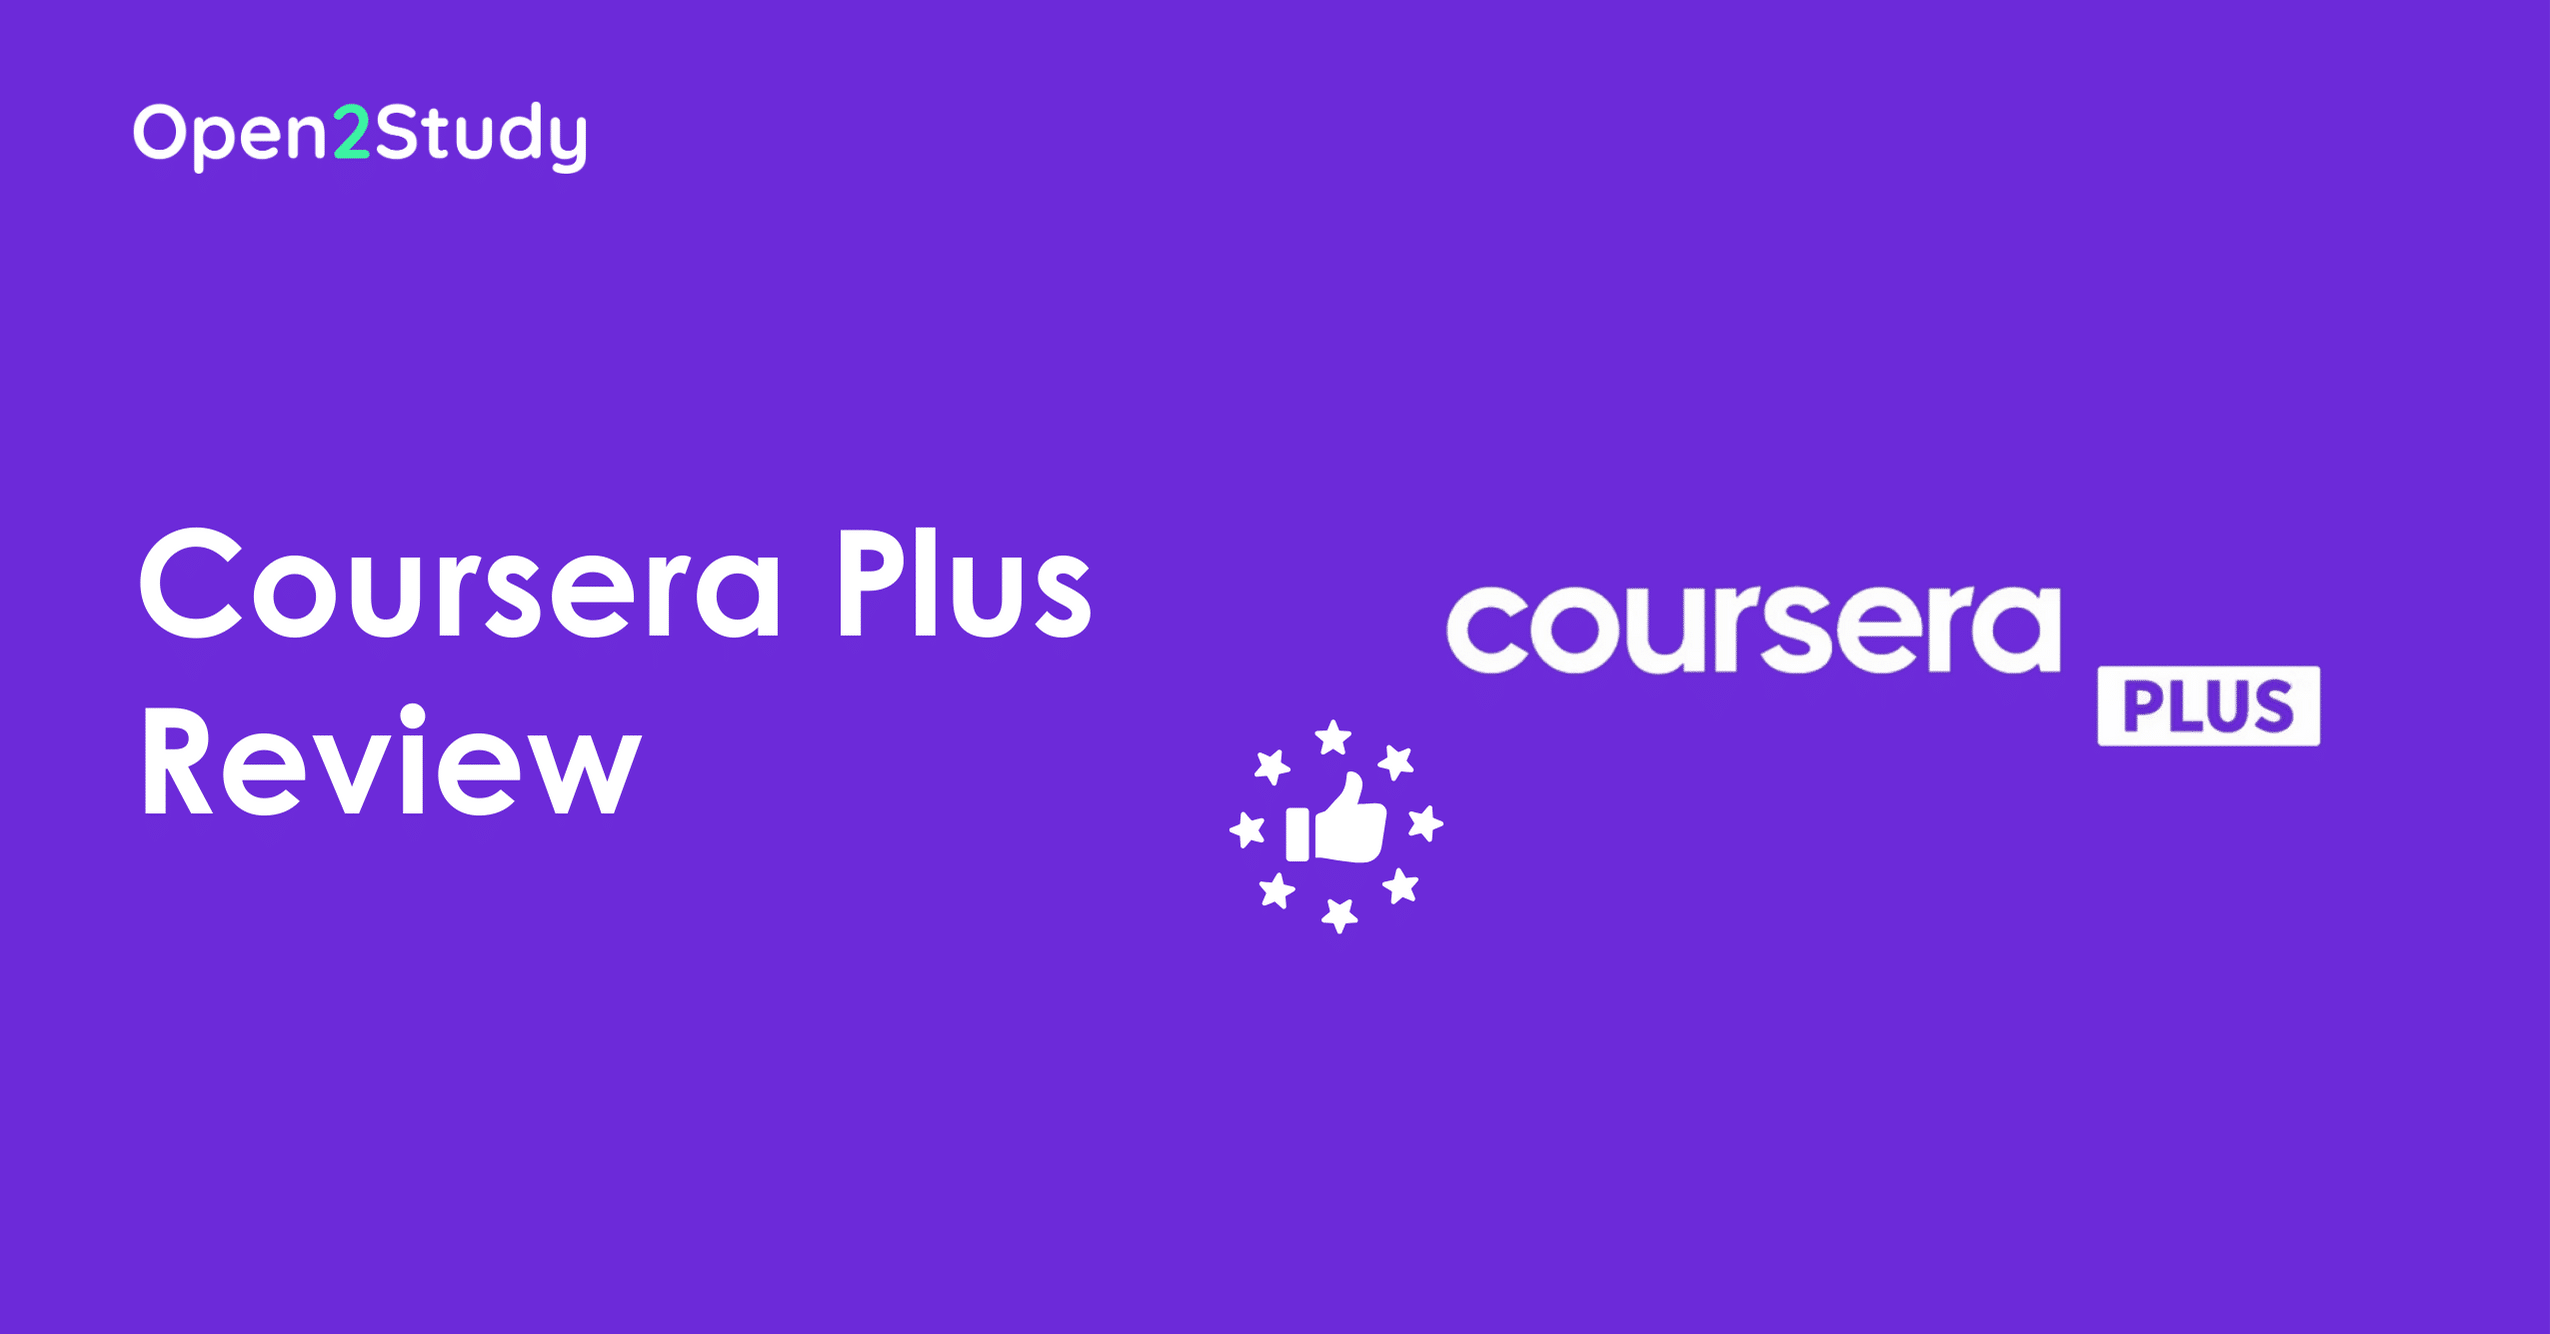 Coursera Plus Review